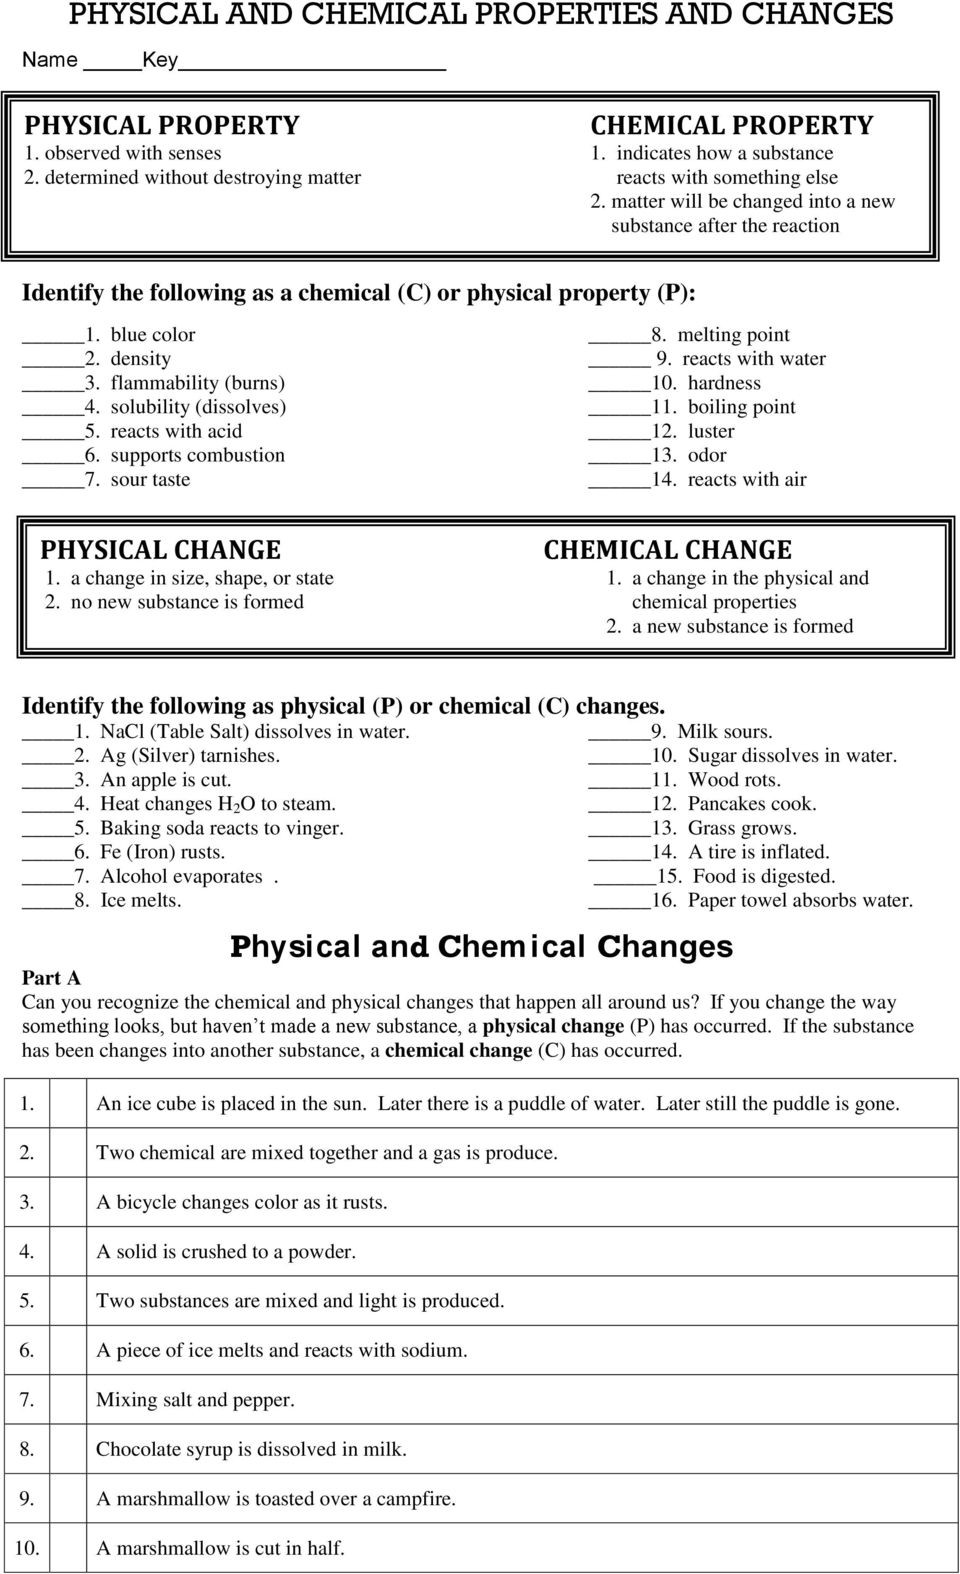 Physical Vs Chemical Changes Worksheet Physical and Chemical Properties and Changes Pdf Free Download